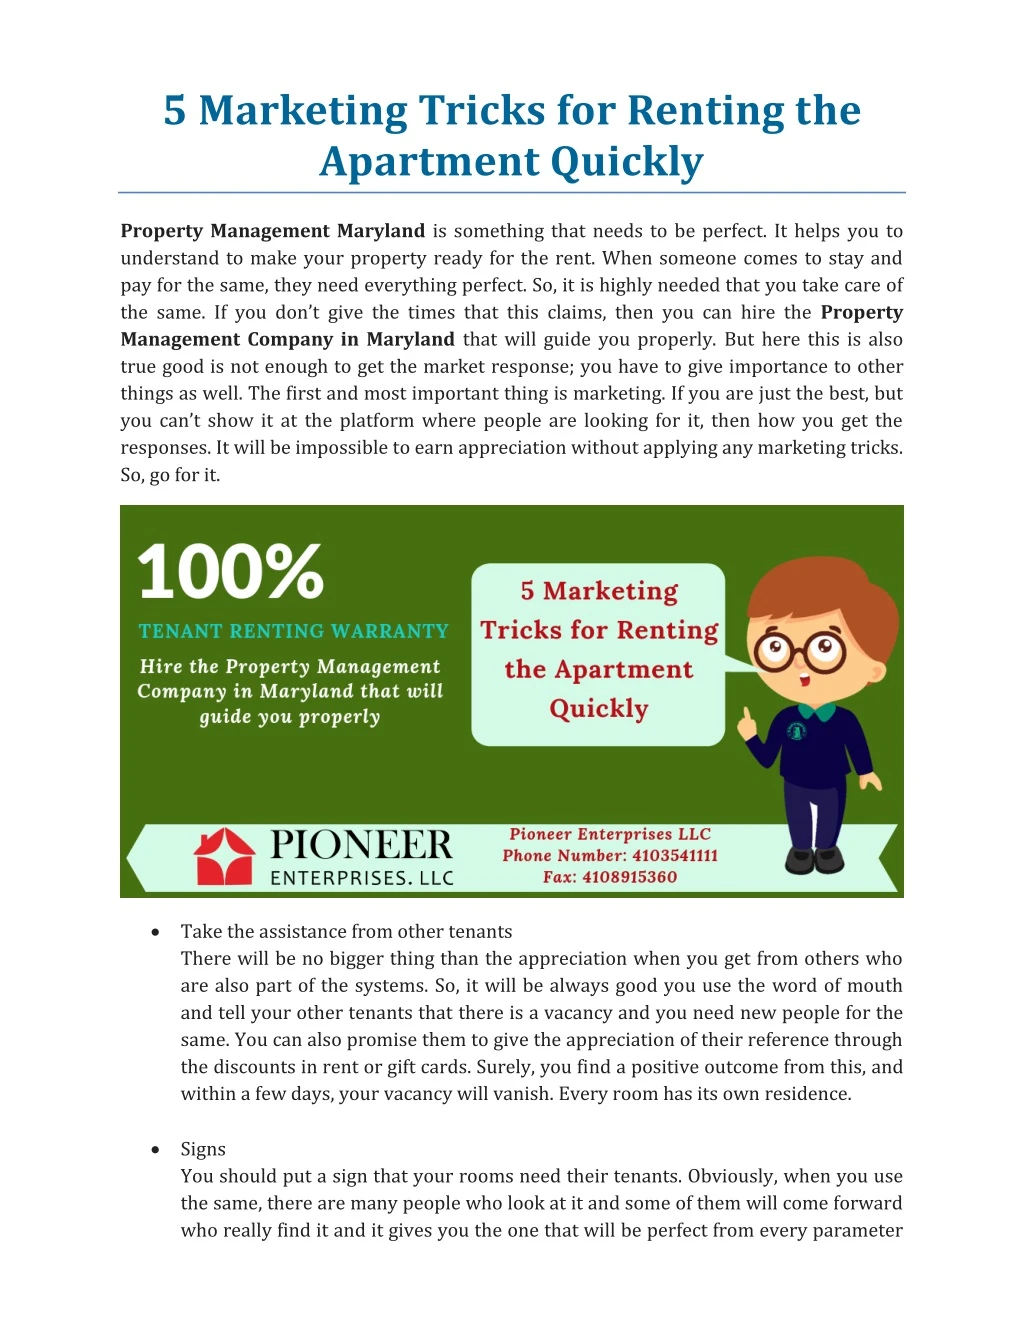 5 marketing tricks for renting the apartment